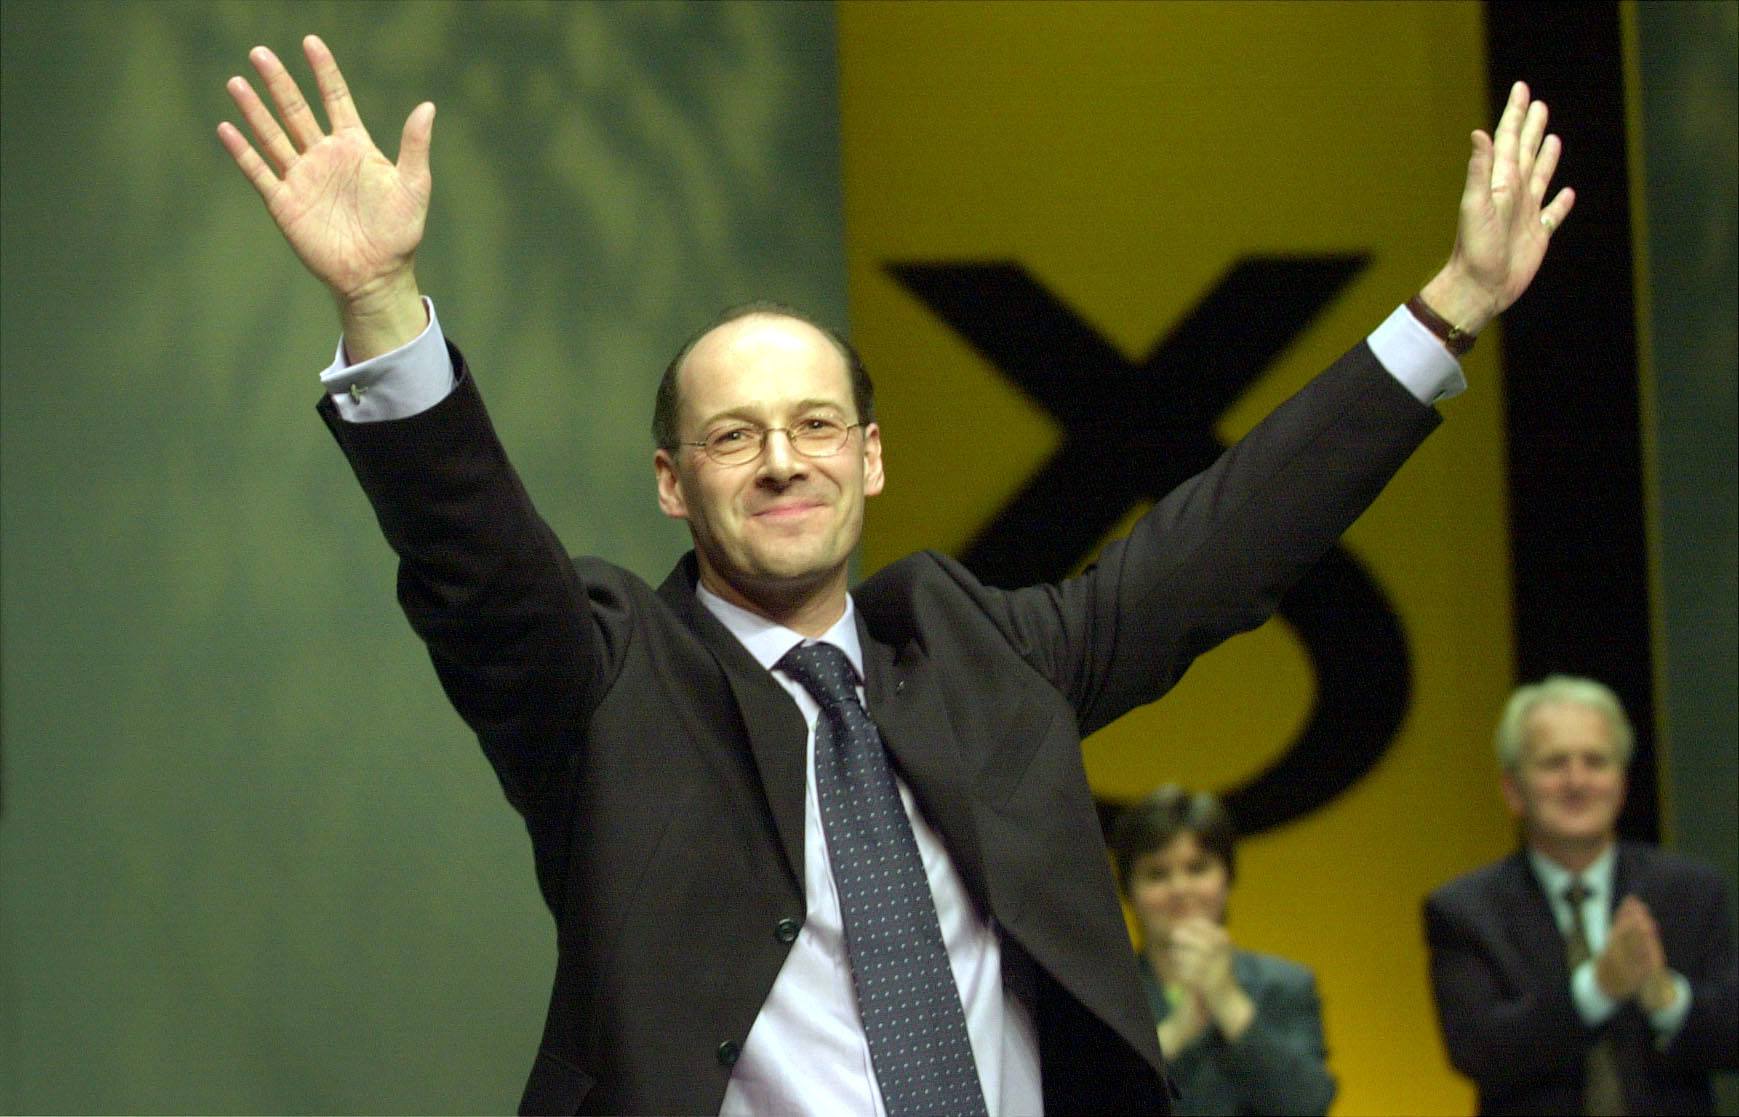 John Swinney thanking supporters after being elected SNP leader in 2000.